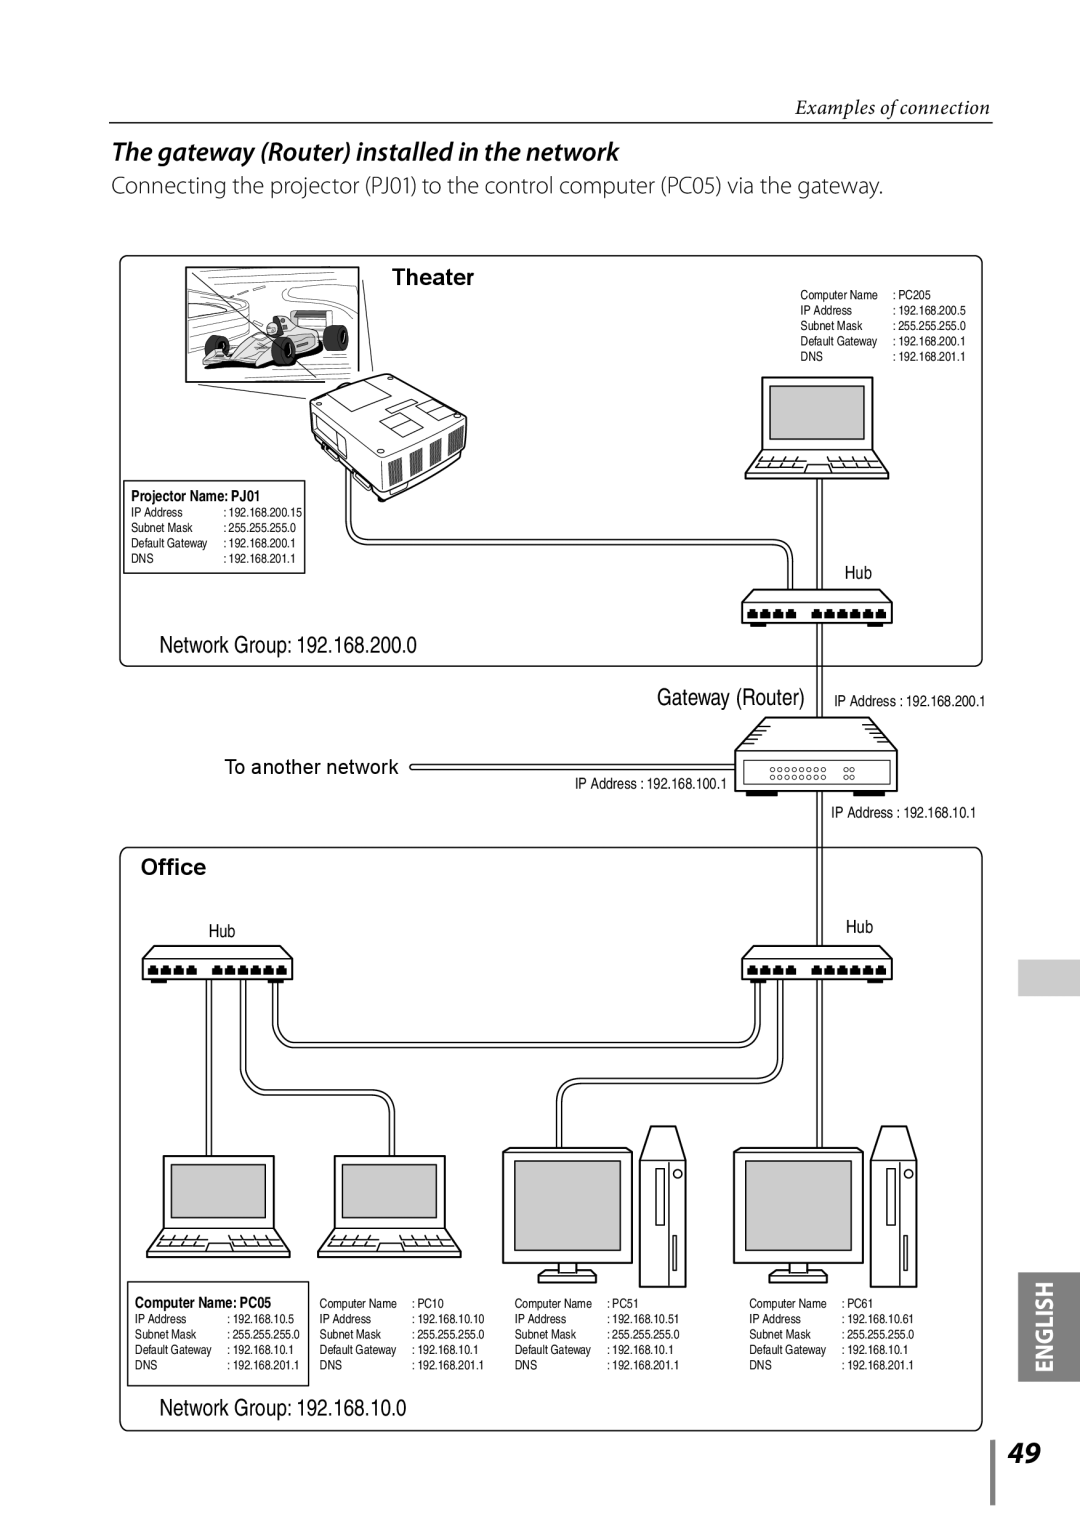 Sanyo Projector owner manual The gateway Router installed in the network, Network Group, English, Examples of connection 